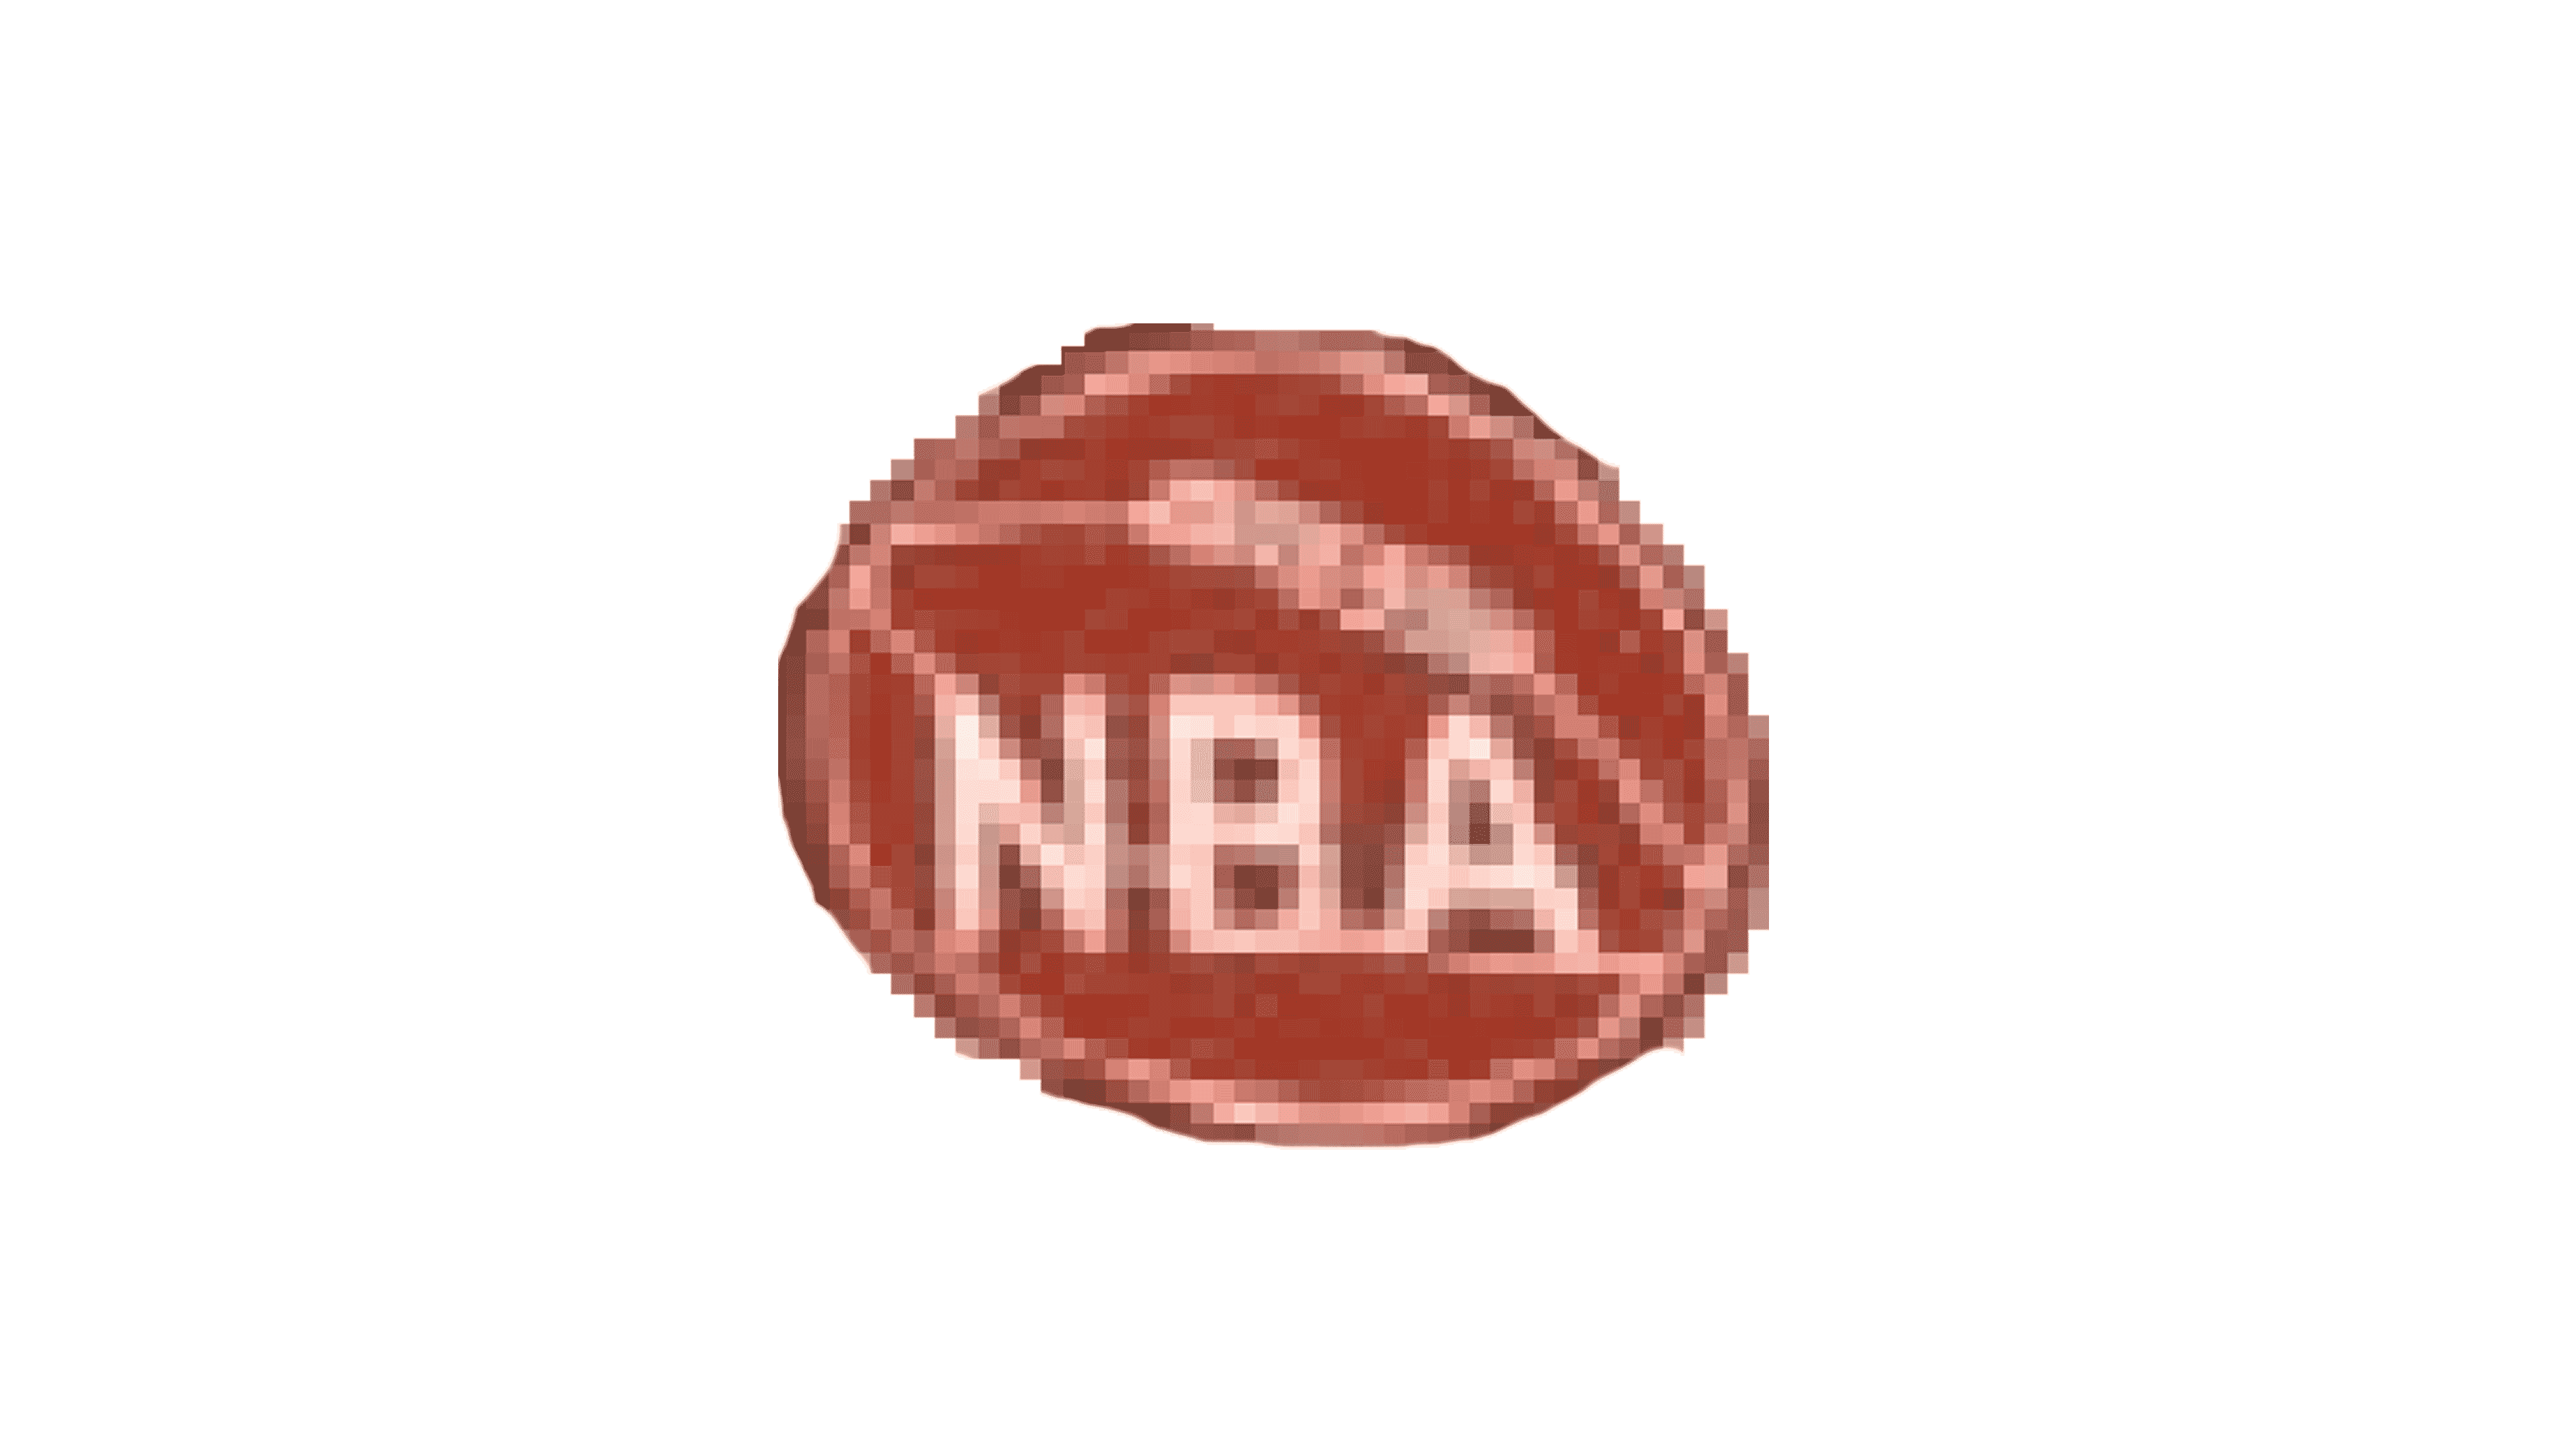 Why does this NBA logo feel very familiar here?